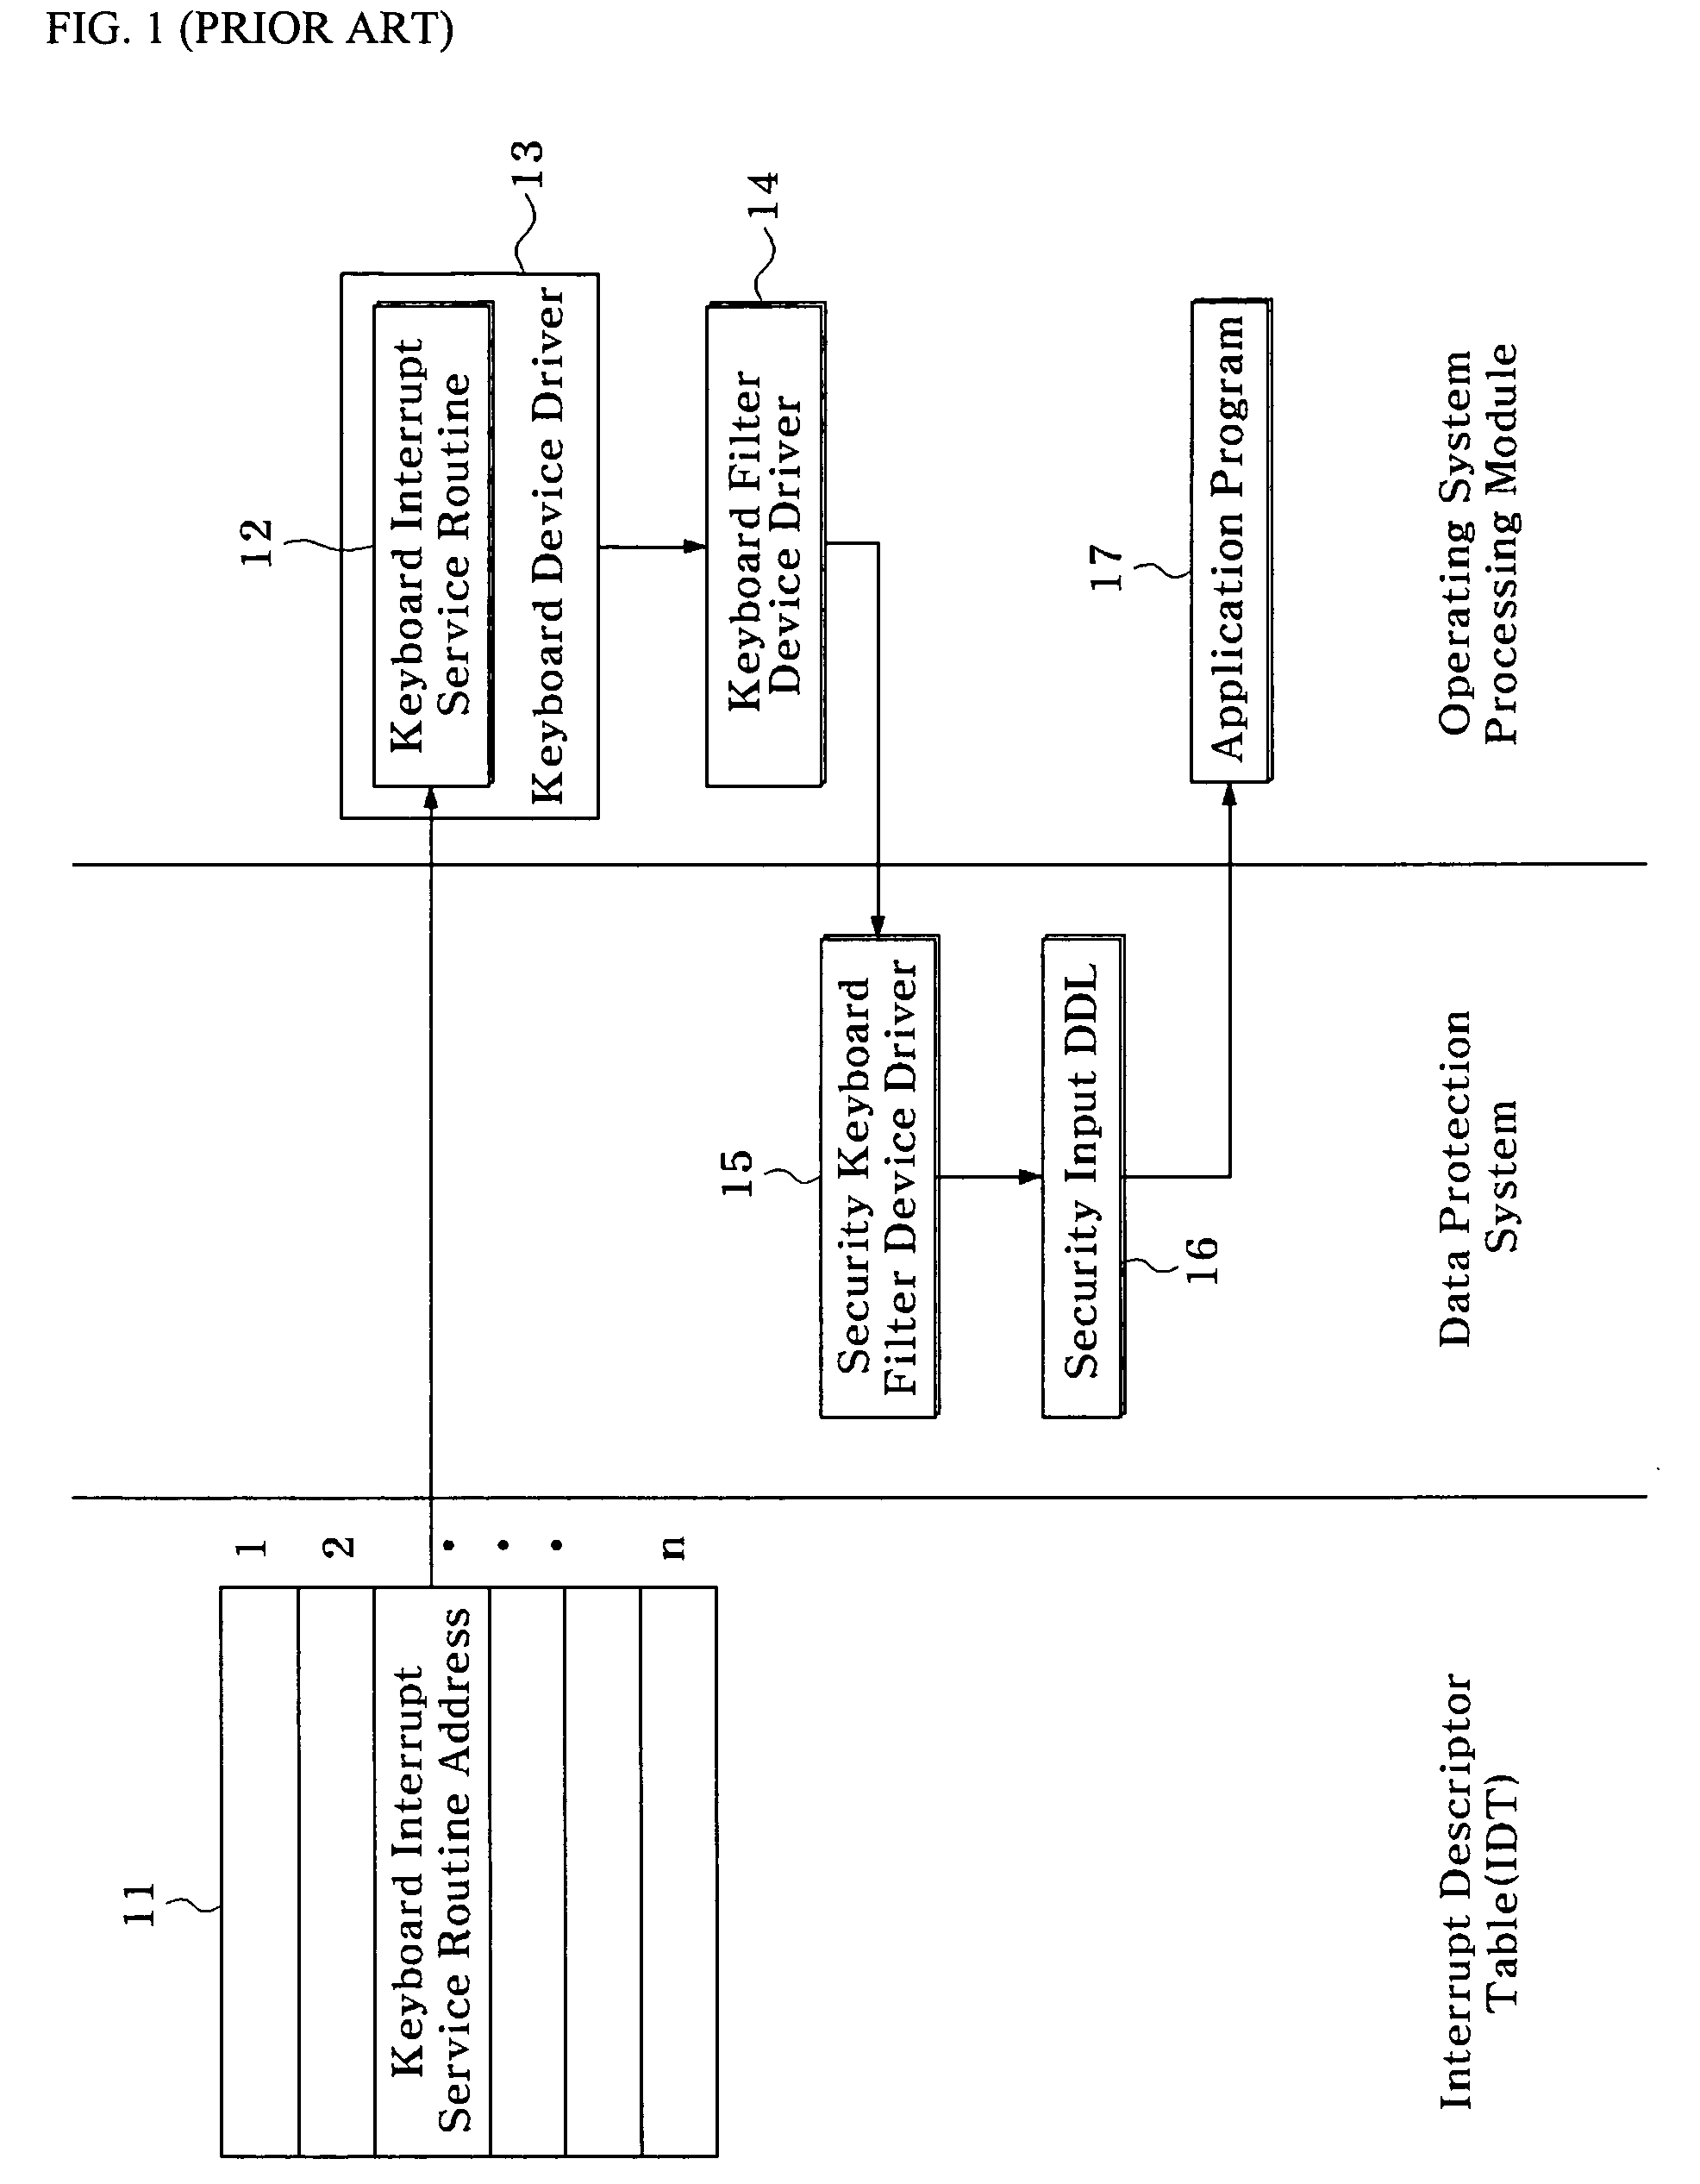 Computer security apparatus and method using security input device driver